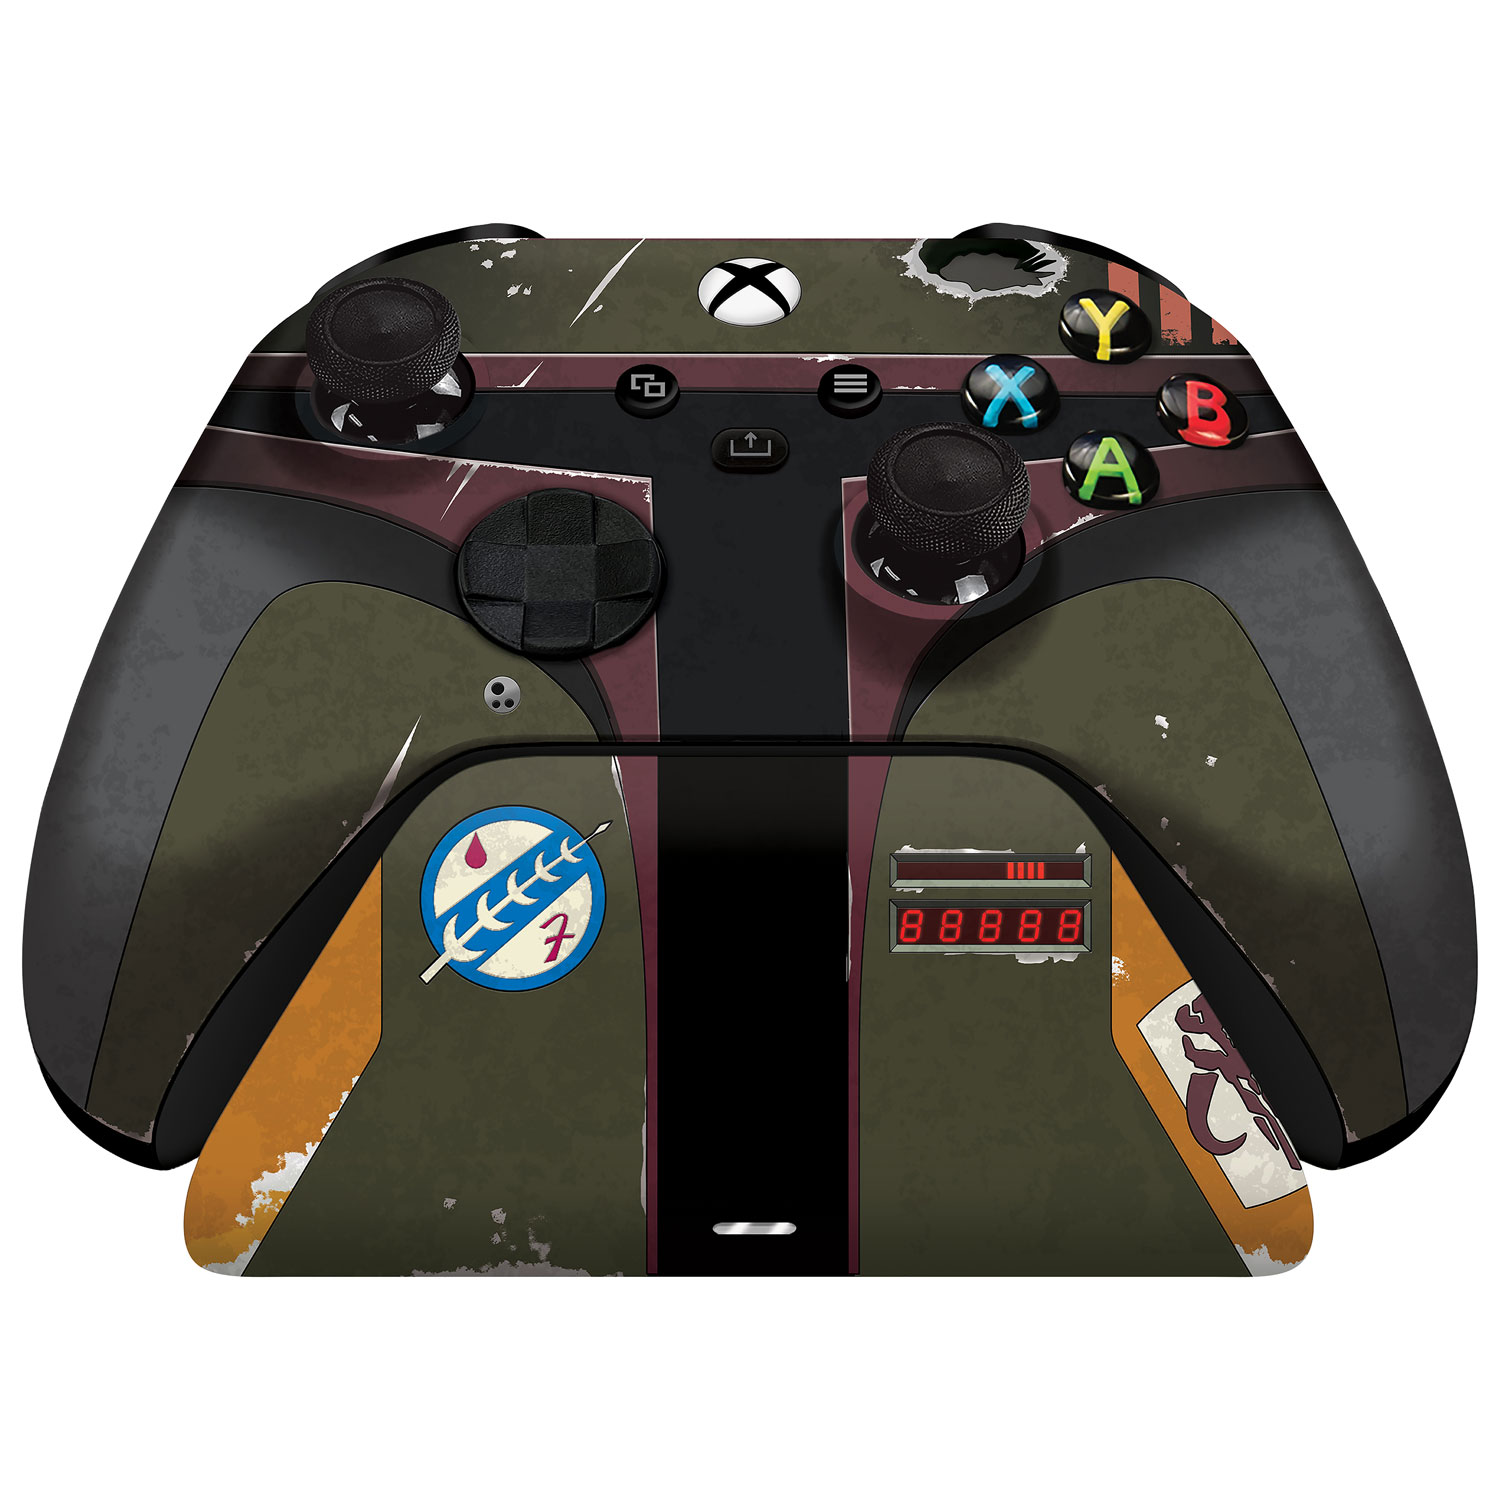 Razer Star Wars Wireless Controller & Charging Stand for Xbox Series X|S - Boba Fett